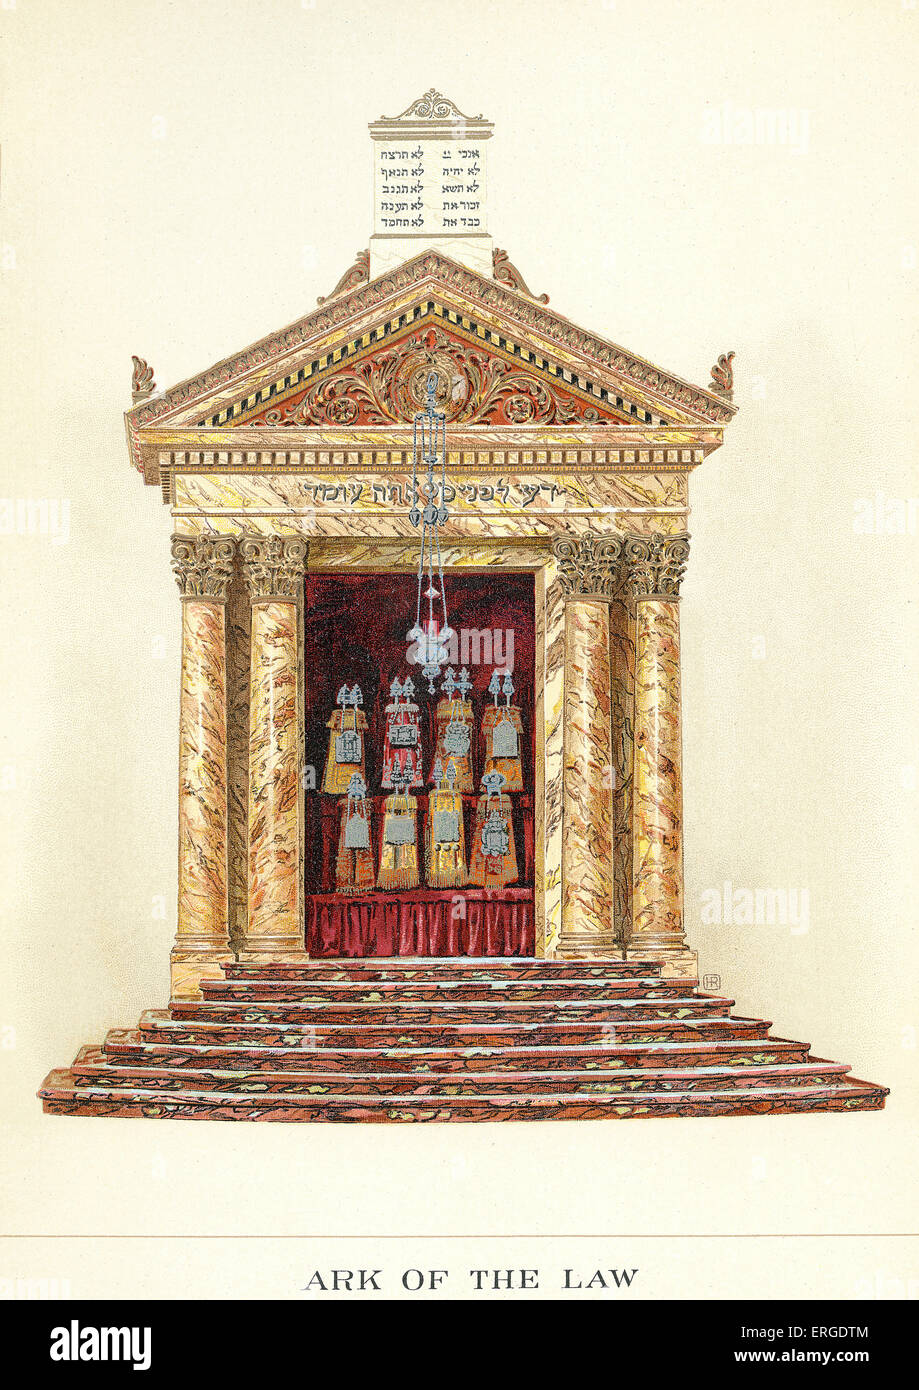 Ark of the Law - with scrolls of the Torah inside. From illustration c. 1900. Stock Photo